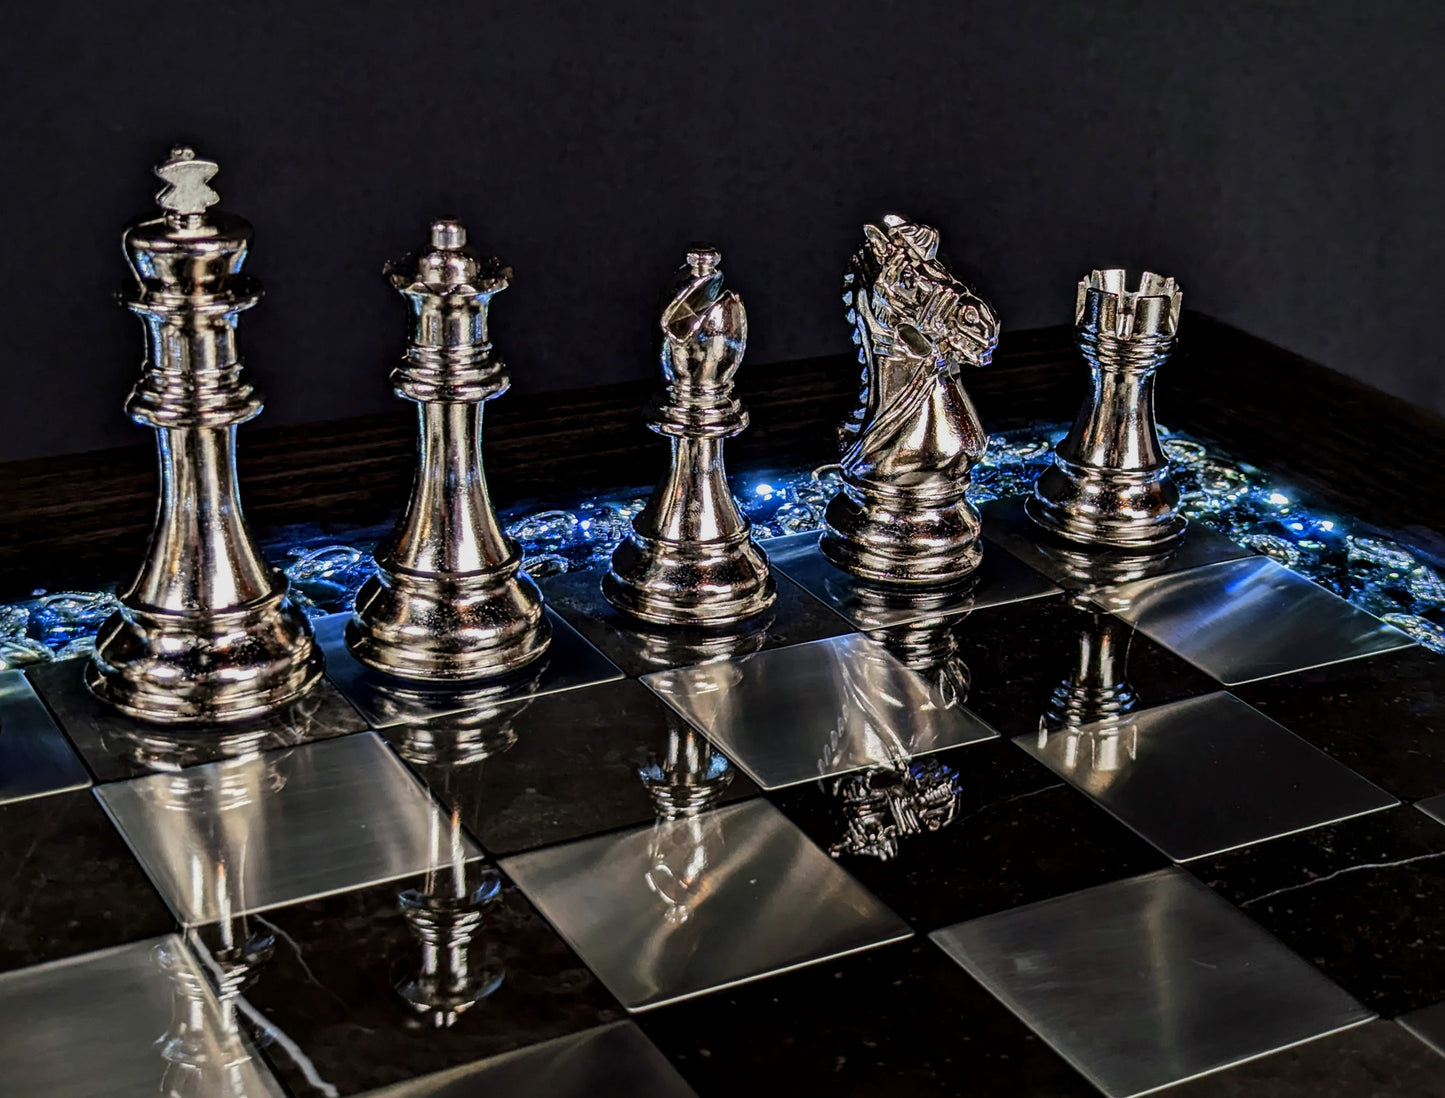 "The Knight" Chess Table